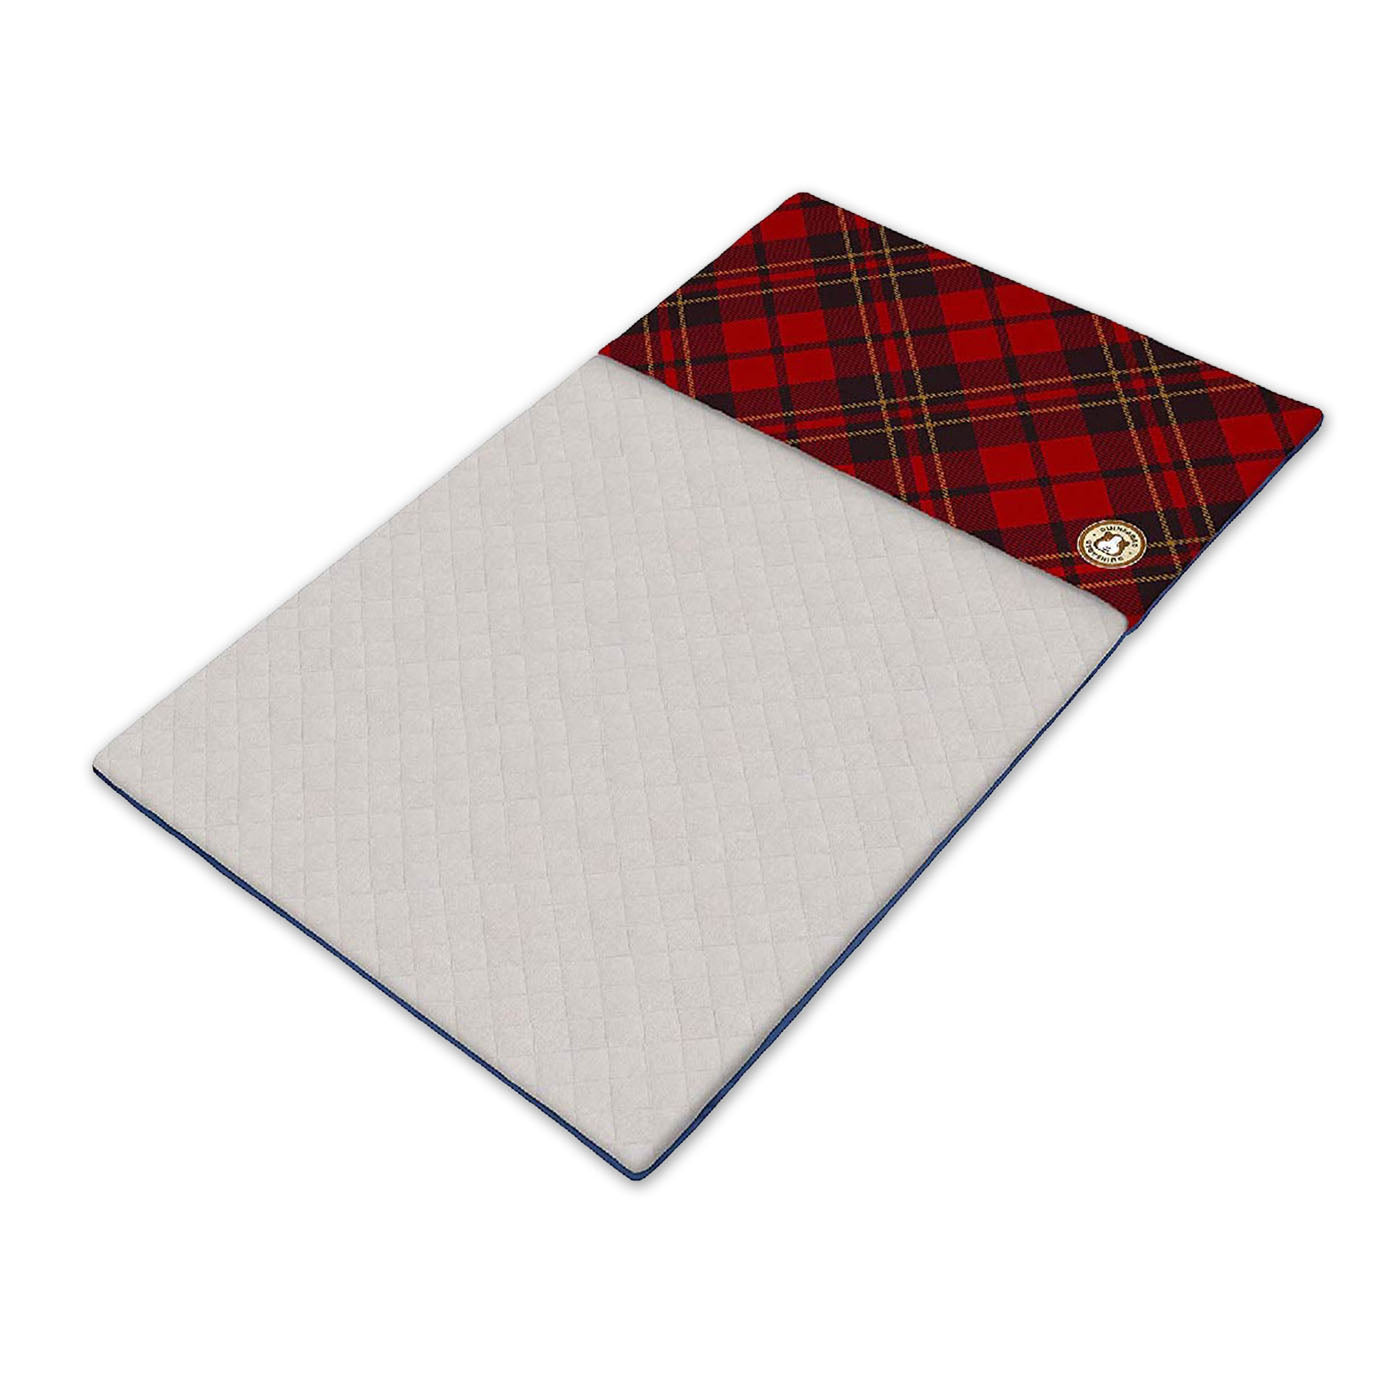 A GuineaDad Original Liner with a Plaid Red pocket, offering a snug and stylish space for guinea pigs. Its eco-friendly, absorbent fabric ensures easy care and a healthy habitat​.